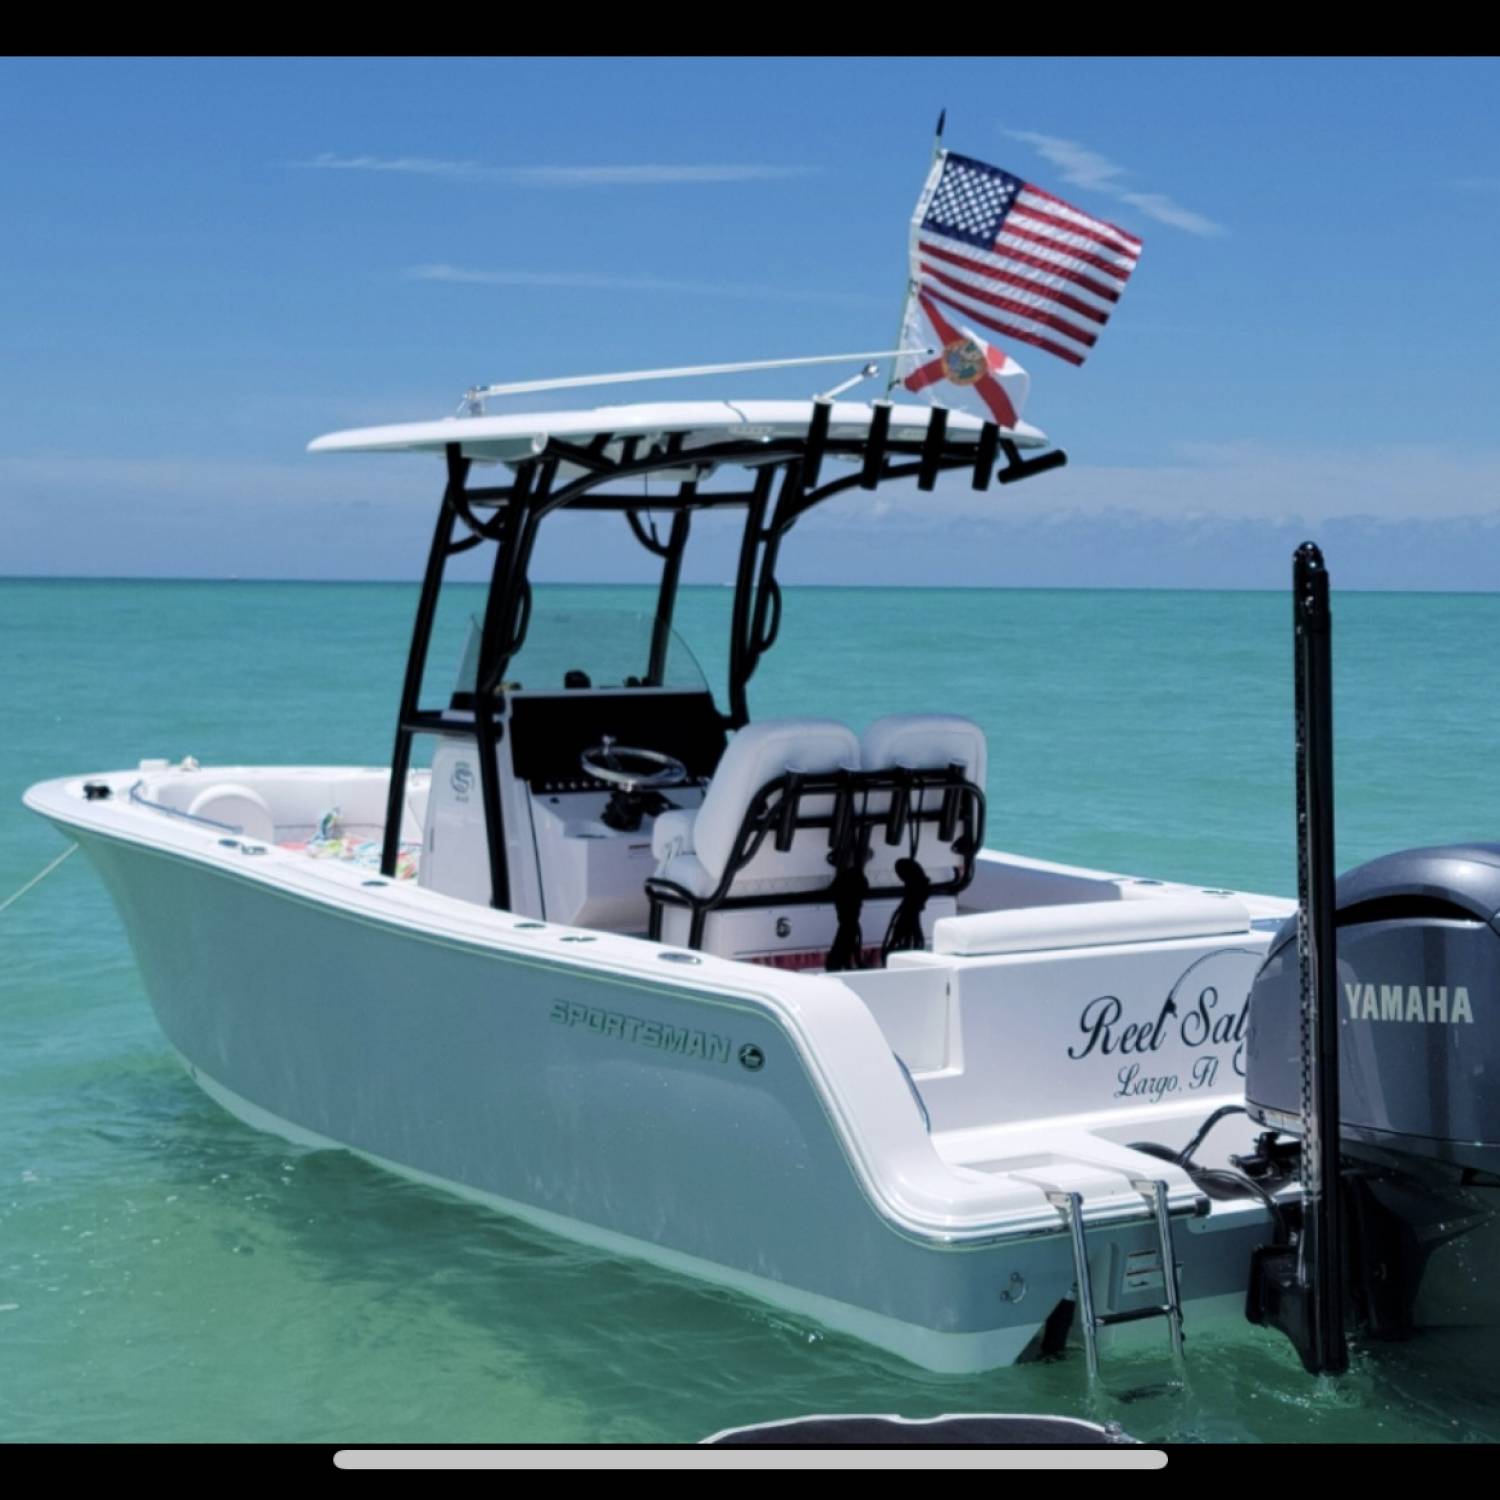 Title: Sportsman in its natural habitat - On board their Sportsman Open 242 Center Console - Location: West coast Florida. Participating in the Photo Contest #SportsmanSeptember